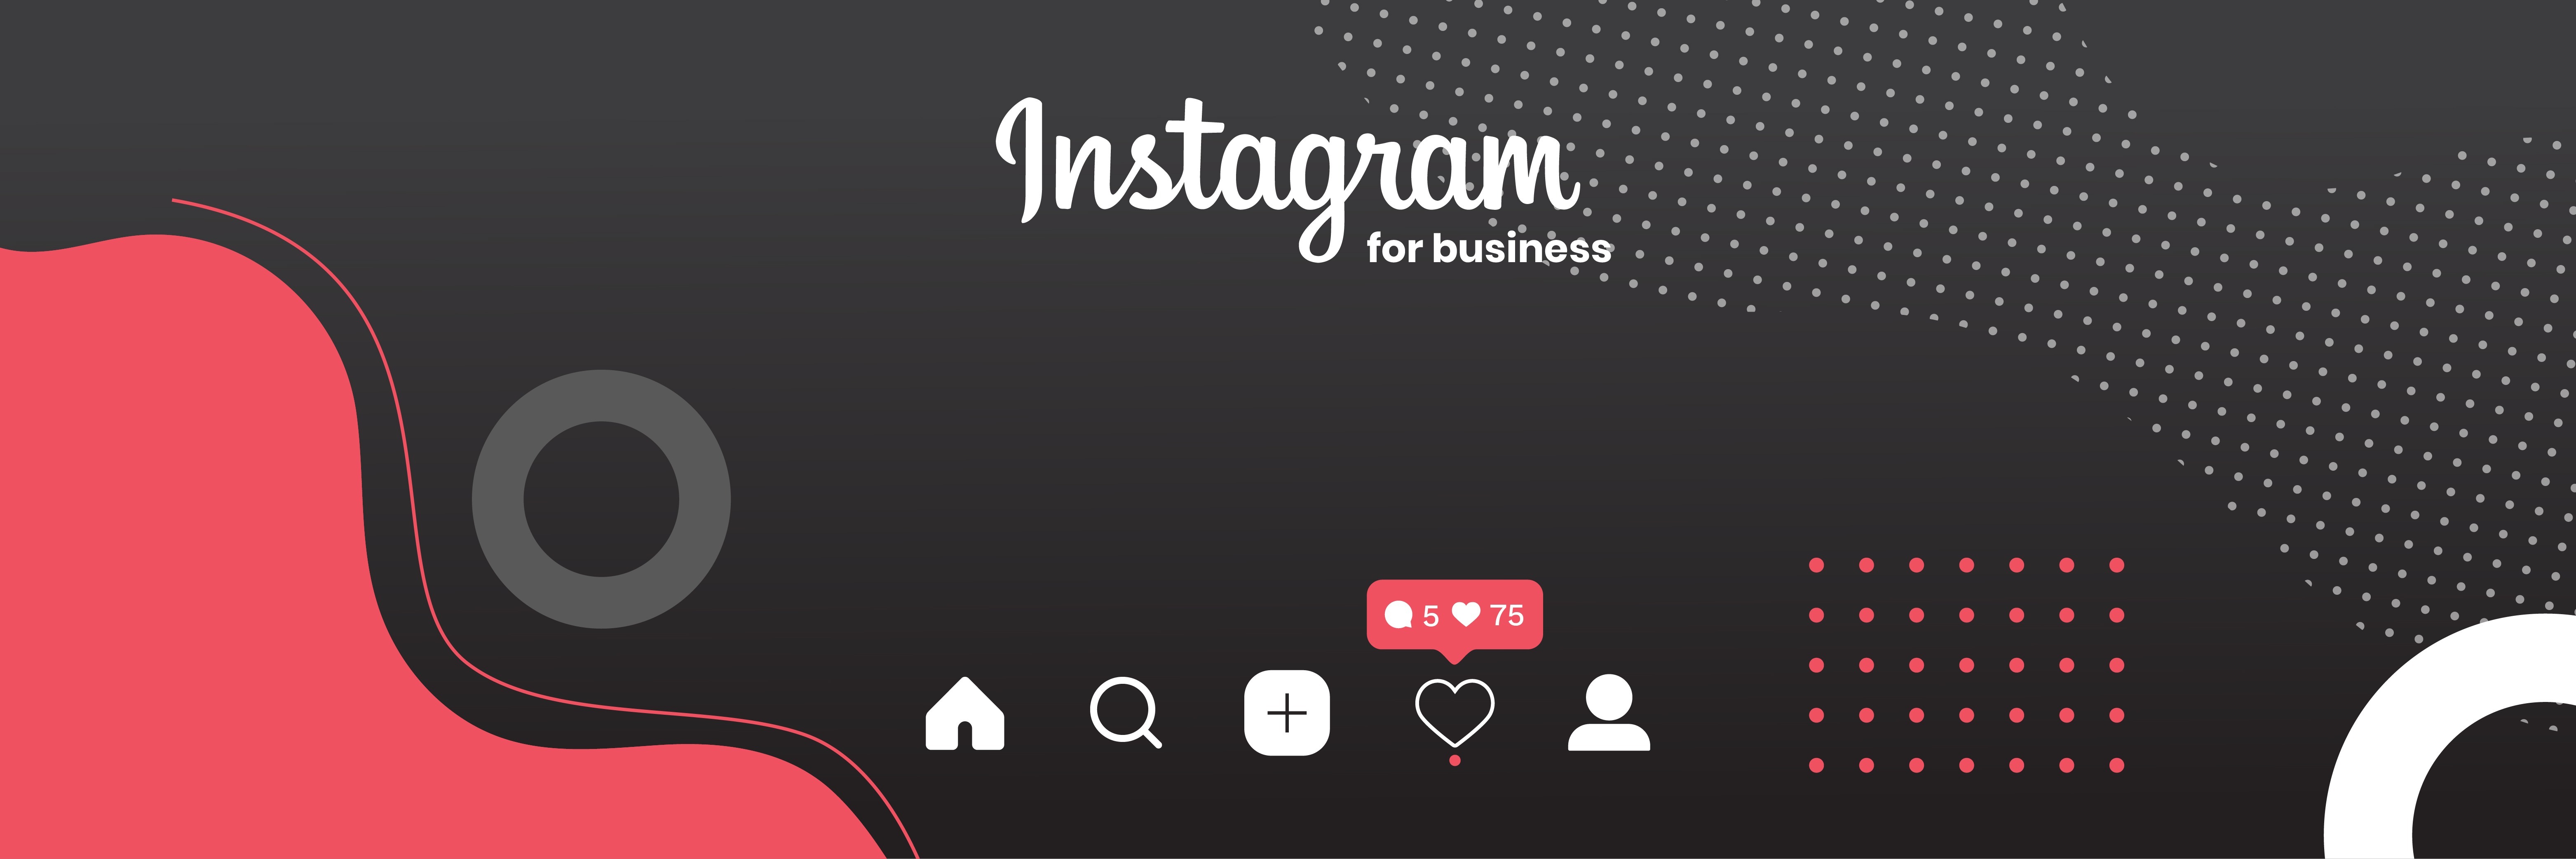 How to use Instagram for Business Marketing and Lead Generation